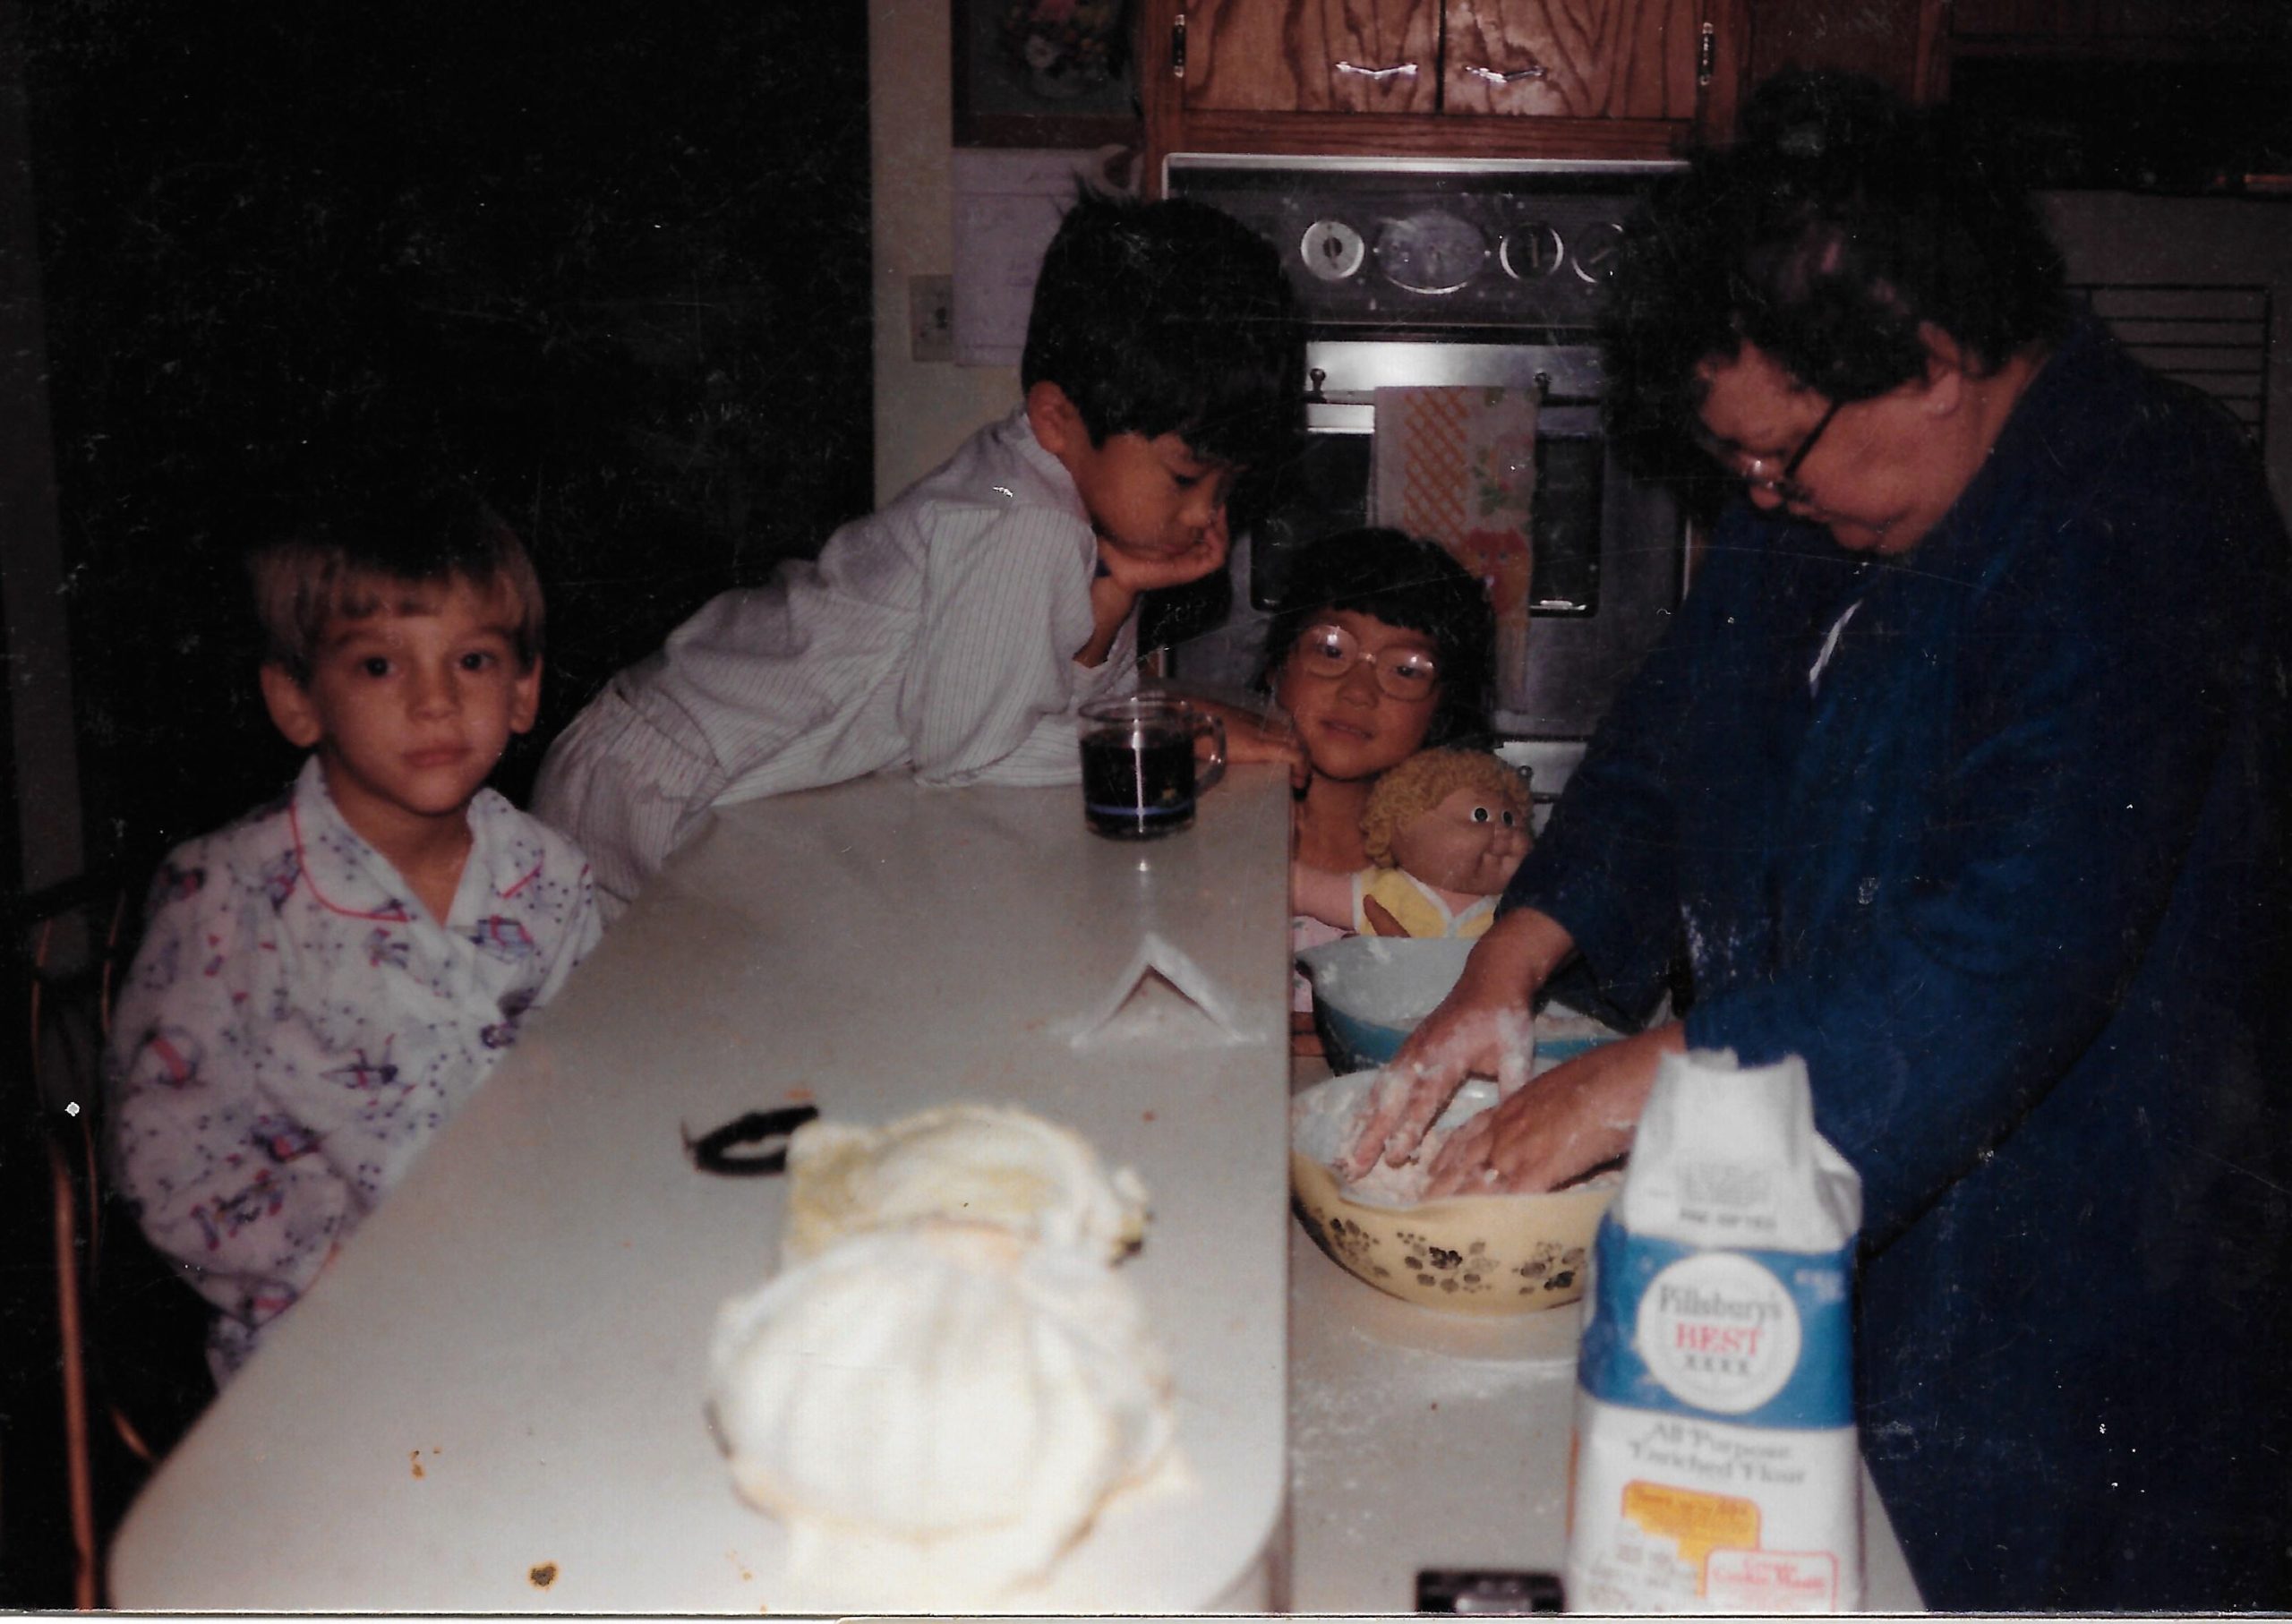 A picture of a grandma baking with her three grandchilden.